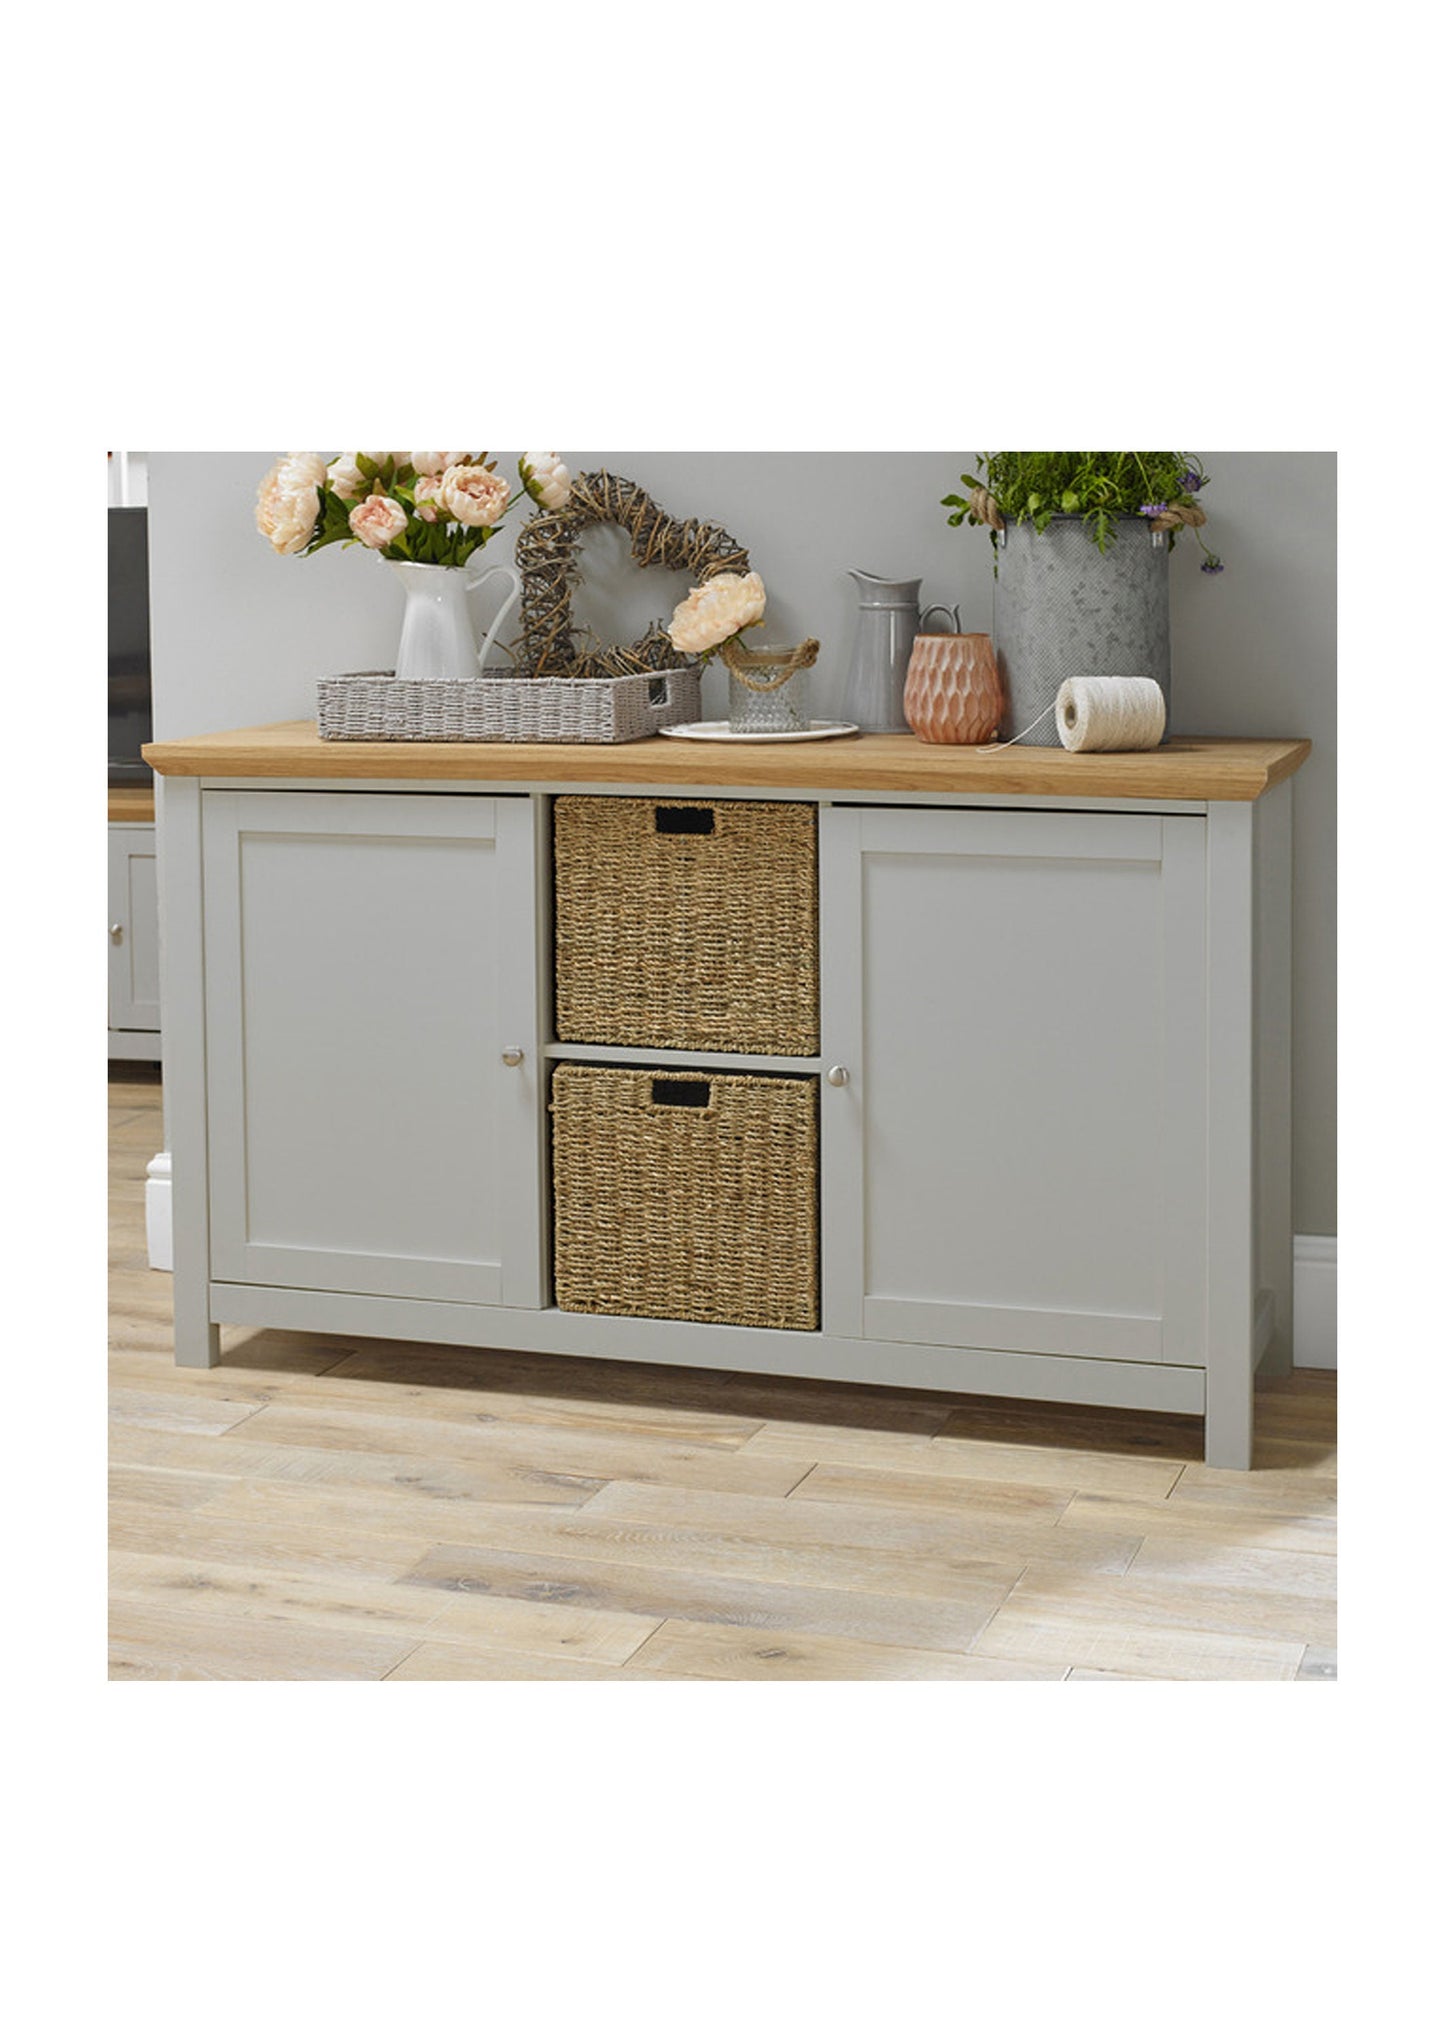 Oak Finish Cottage/ Traditional Style Sideboard Grey or Cream